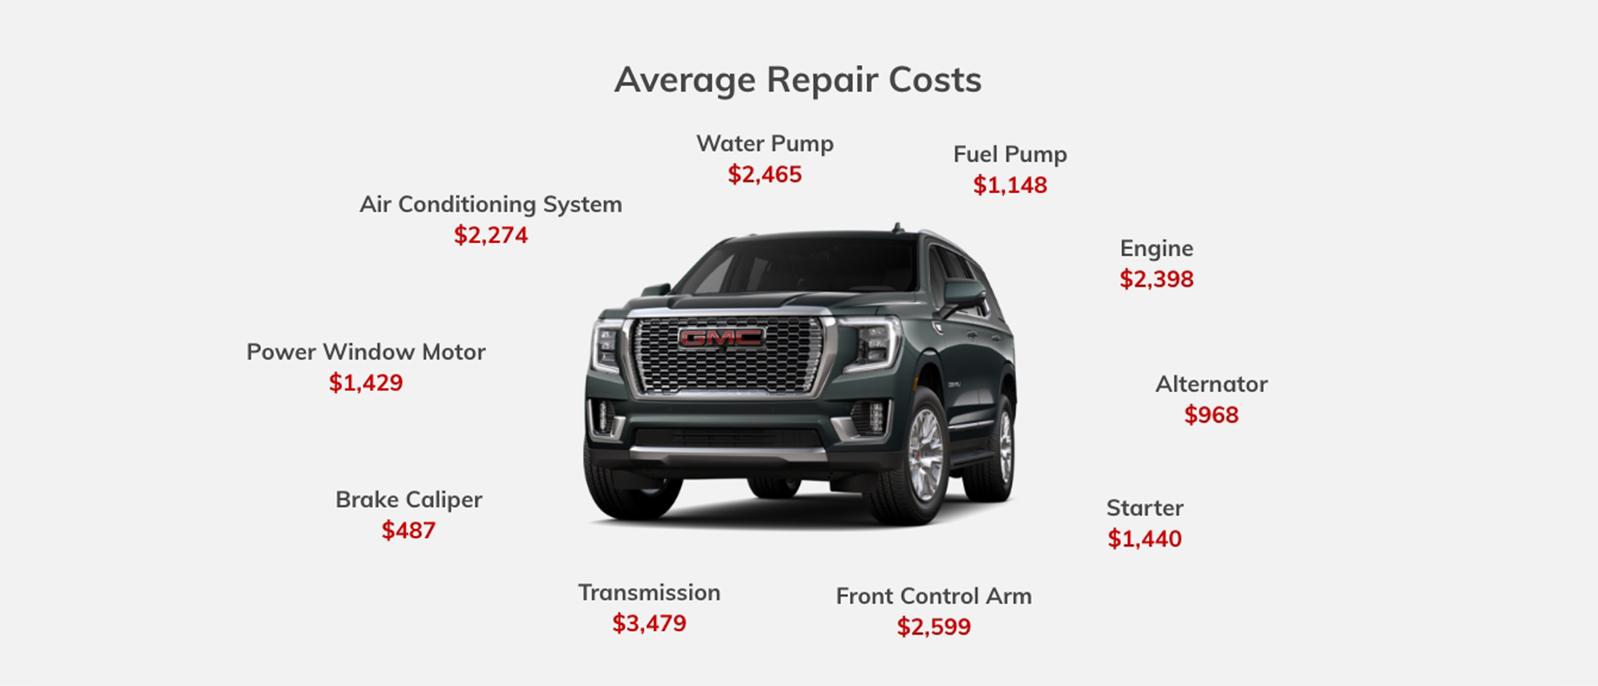 The average repair cost for an engine is $2,398. A transmission replacement could cost $3,479. The GMC Protection Plan covers up to 1,500 auto parts for your vehicle when it’s time for replacement.